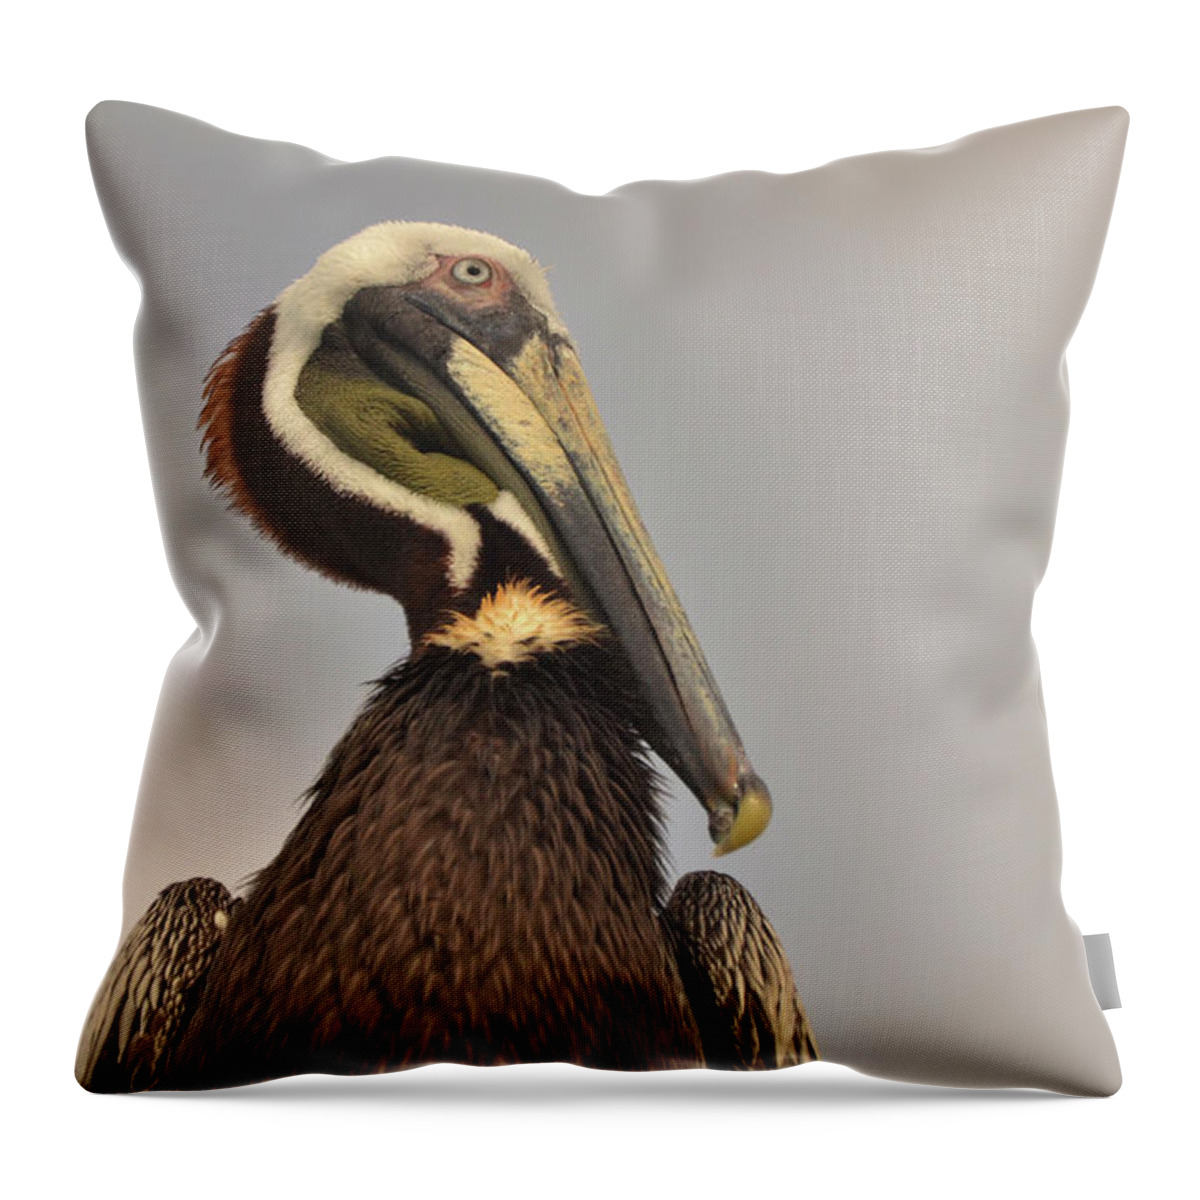 Pelican Throw Pillow featuring the photograph Pelican by Nancy Landry